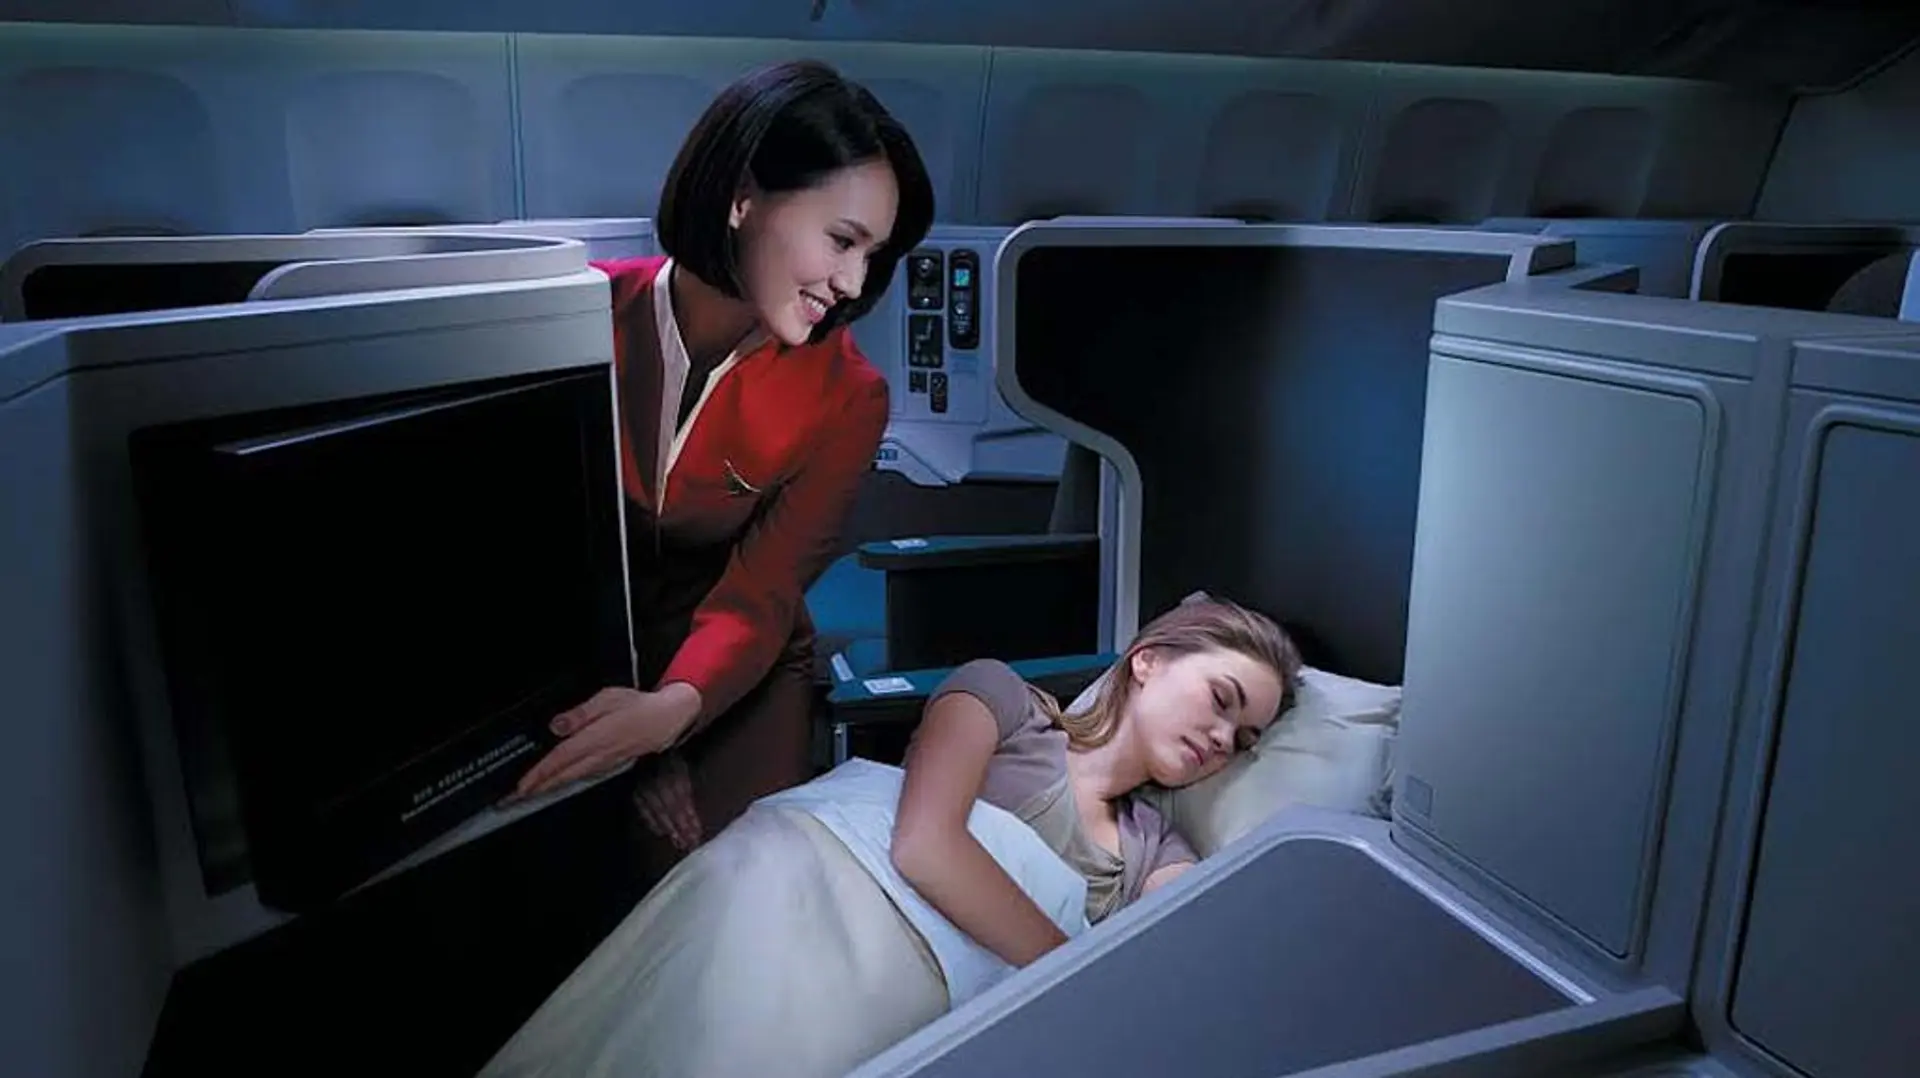 Airlines Toplists - The Best Business Class Beds & Bedding